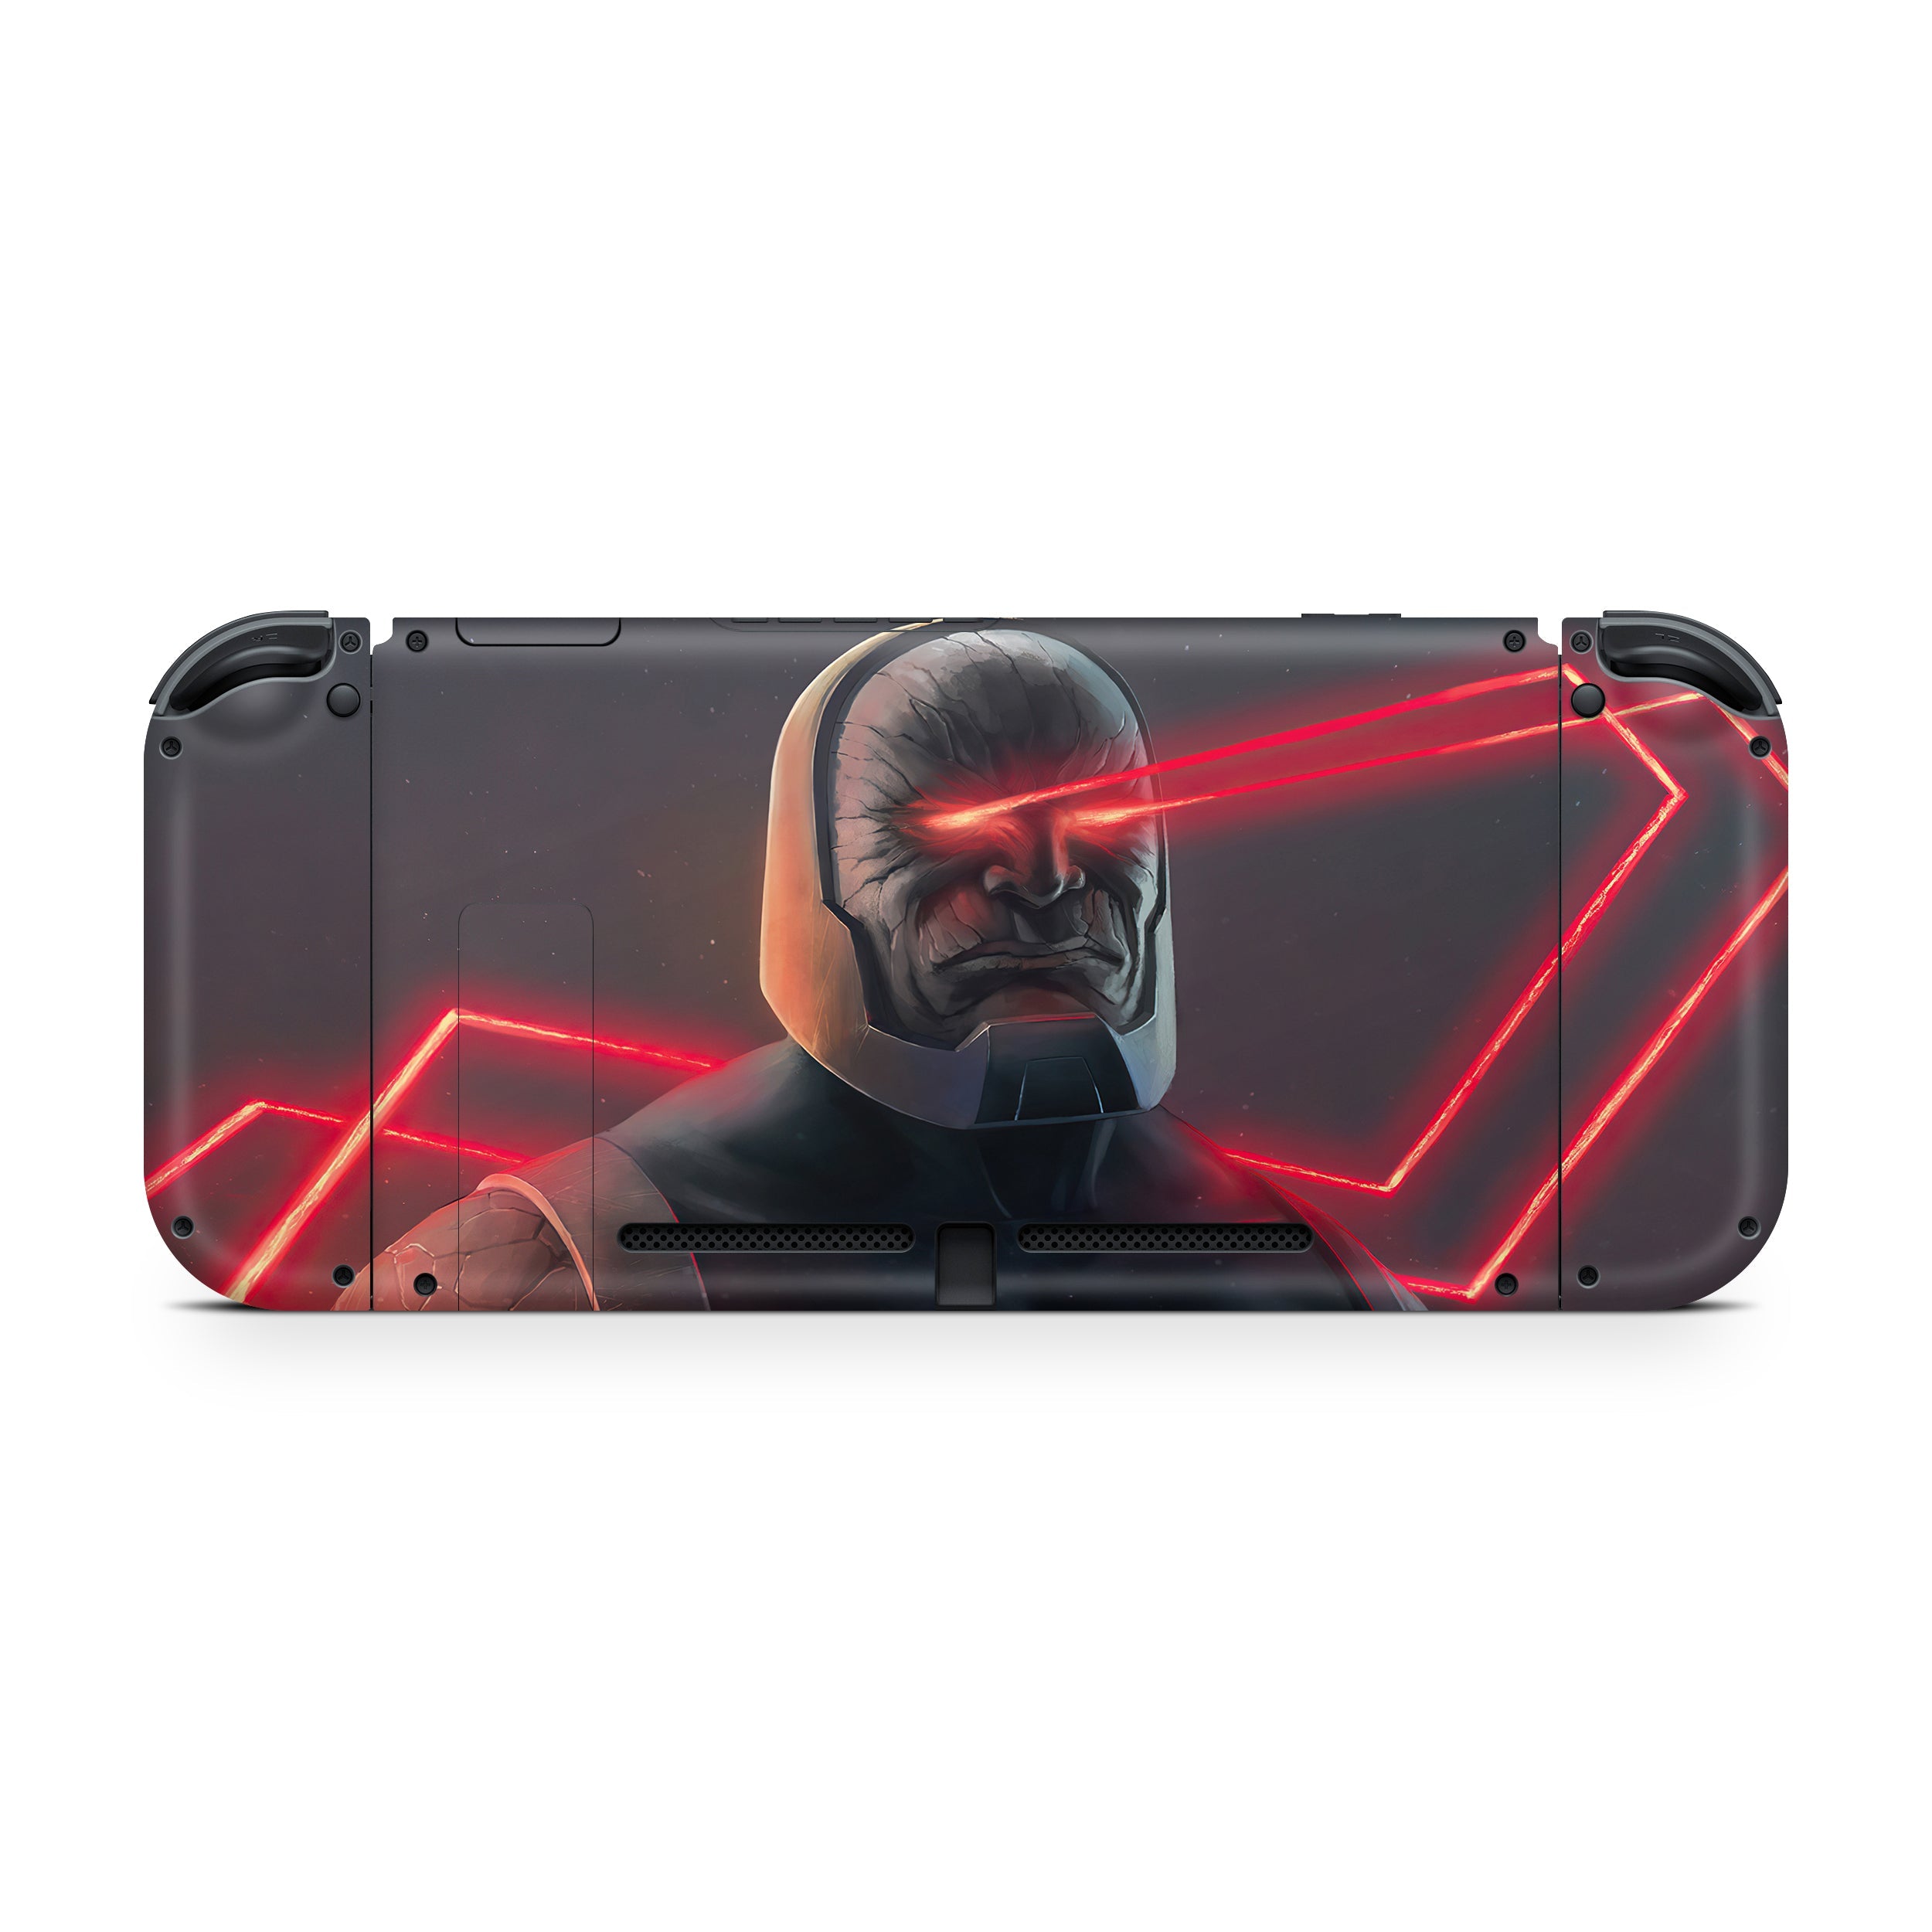 A video game skin featuring a DC Comics Darkseid design for the Nintendo Switch.